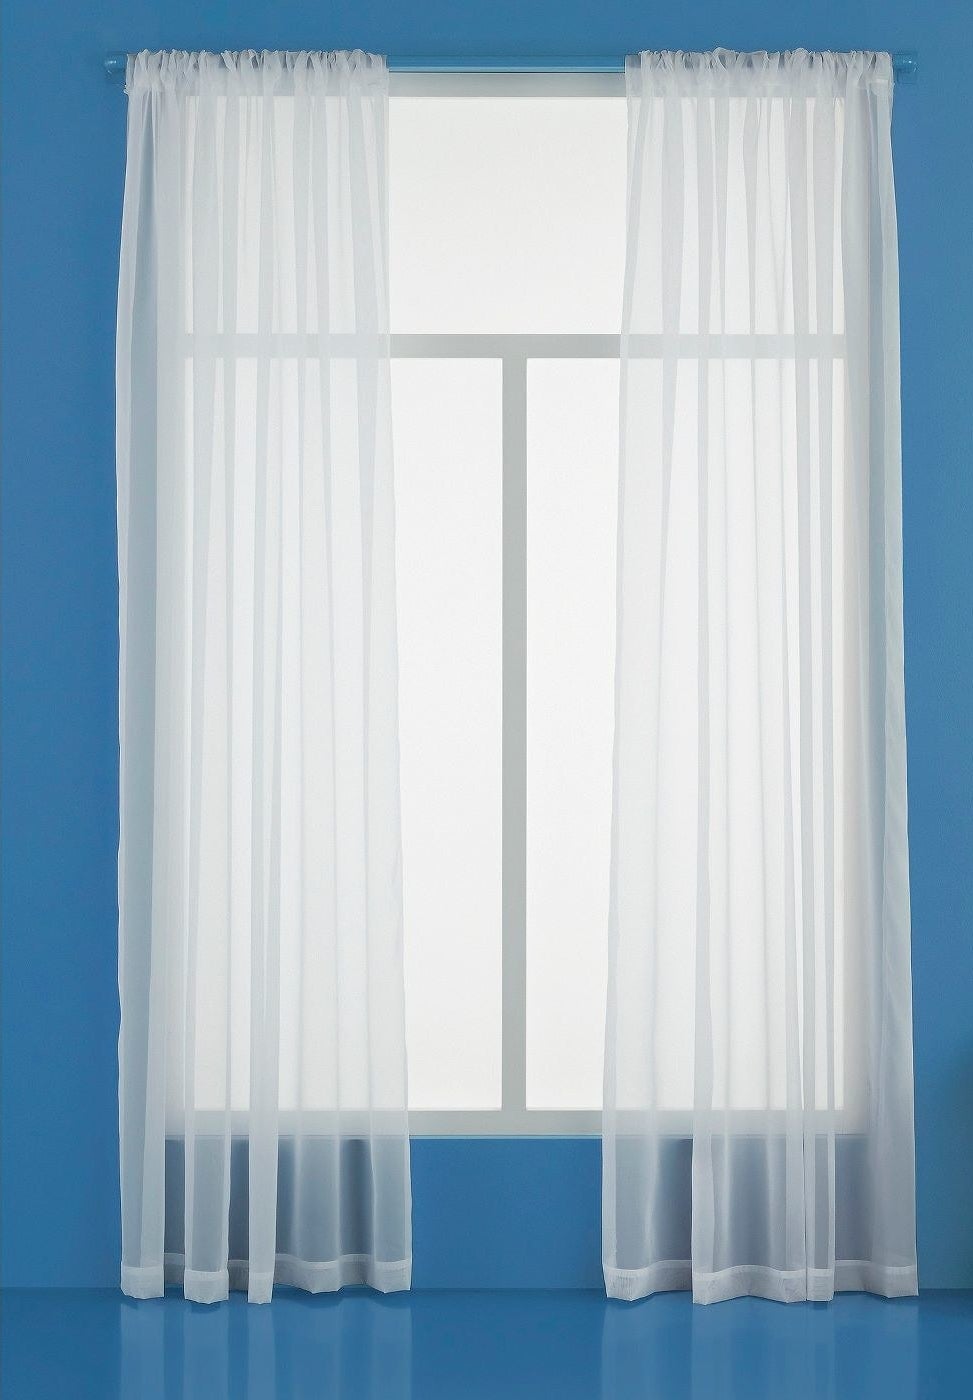 The white sheer curtains